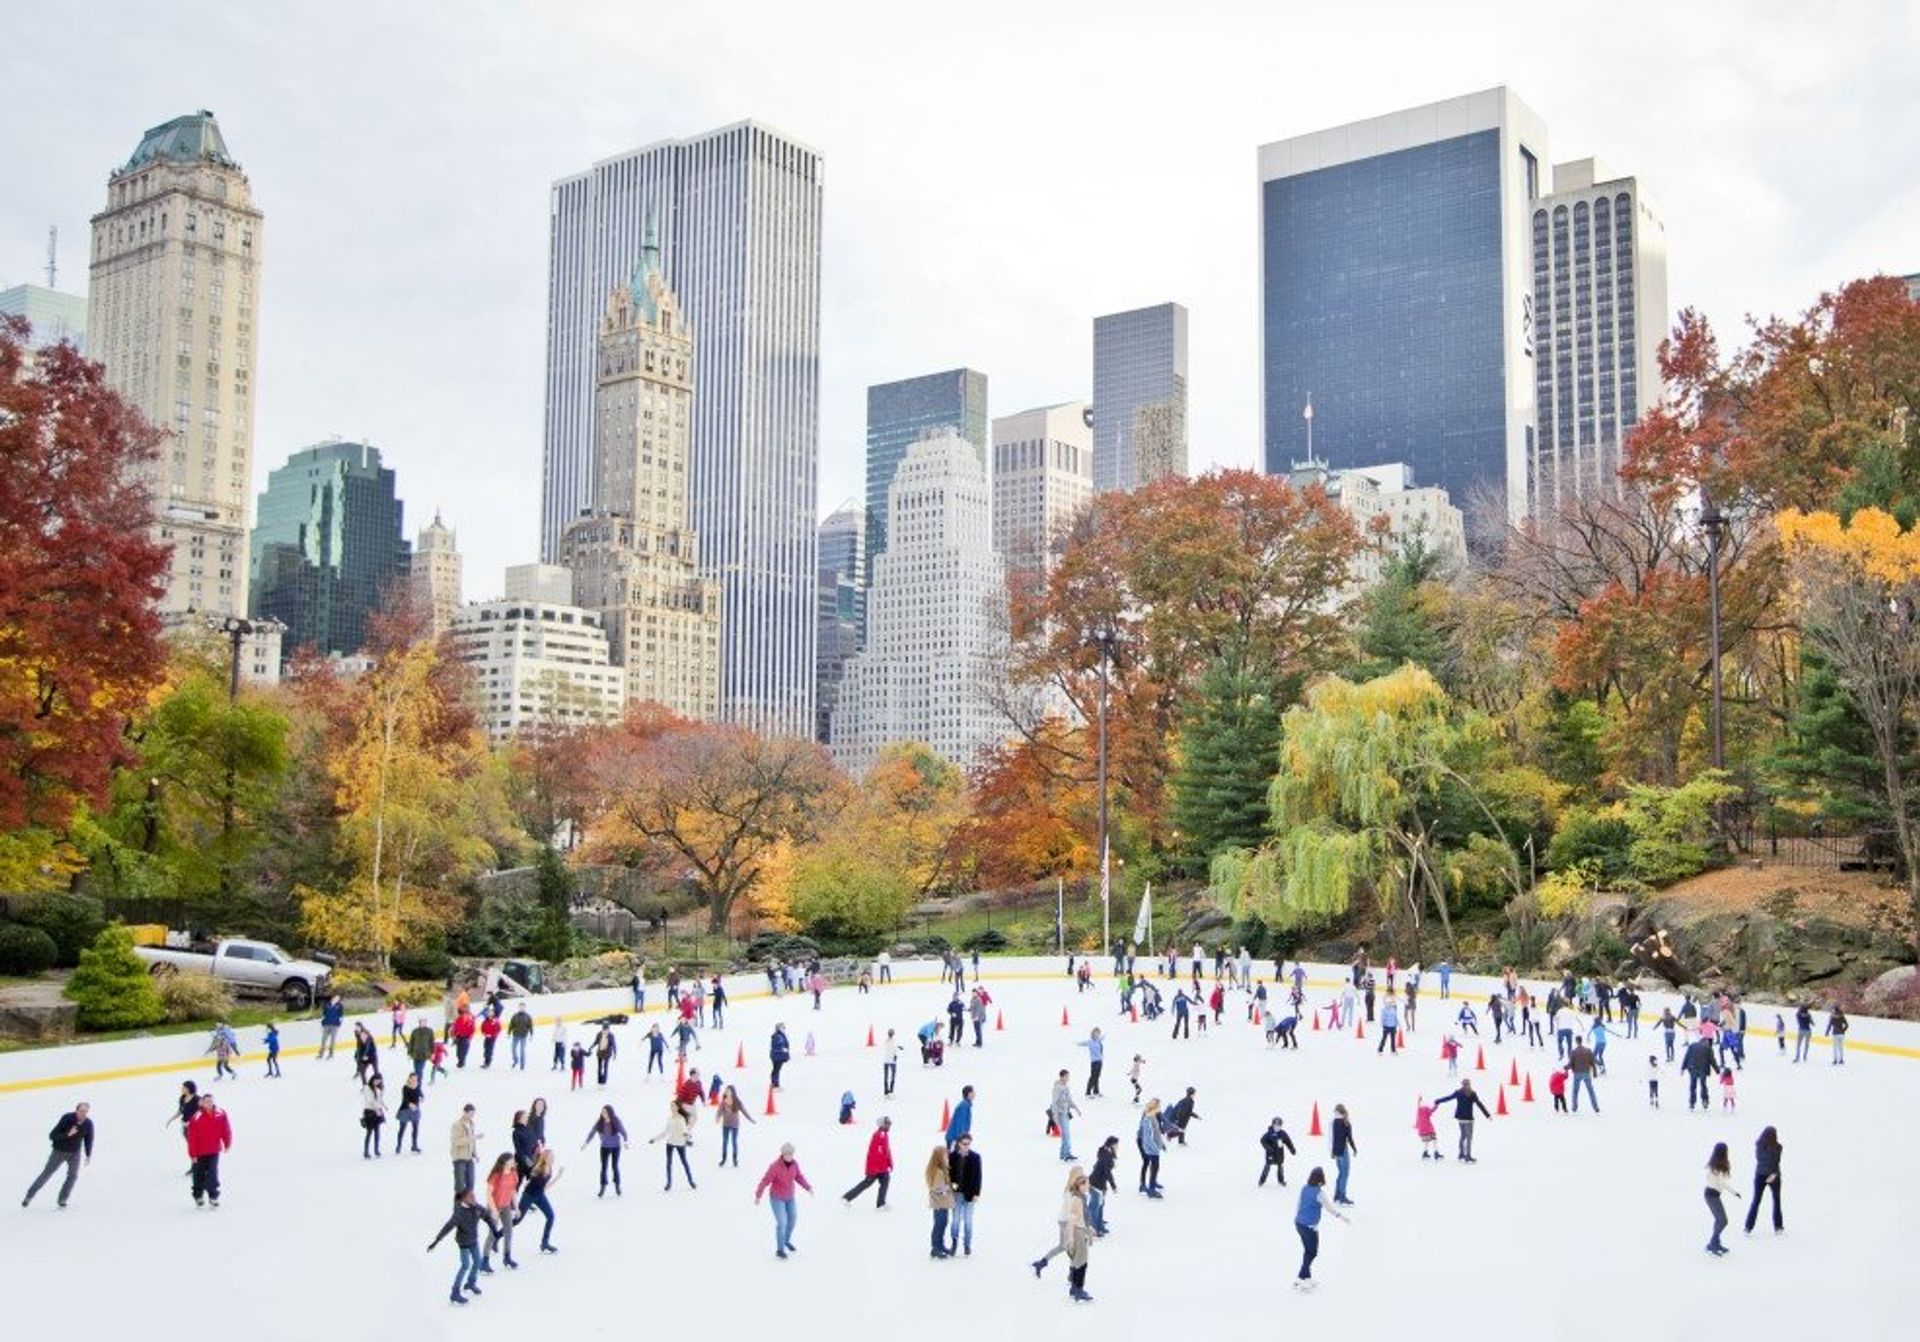 Visiting in winter? Ice skating in New York's iconic Central Park is a must!